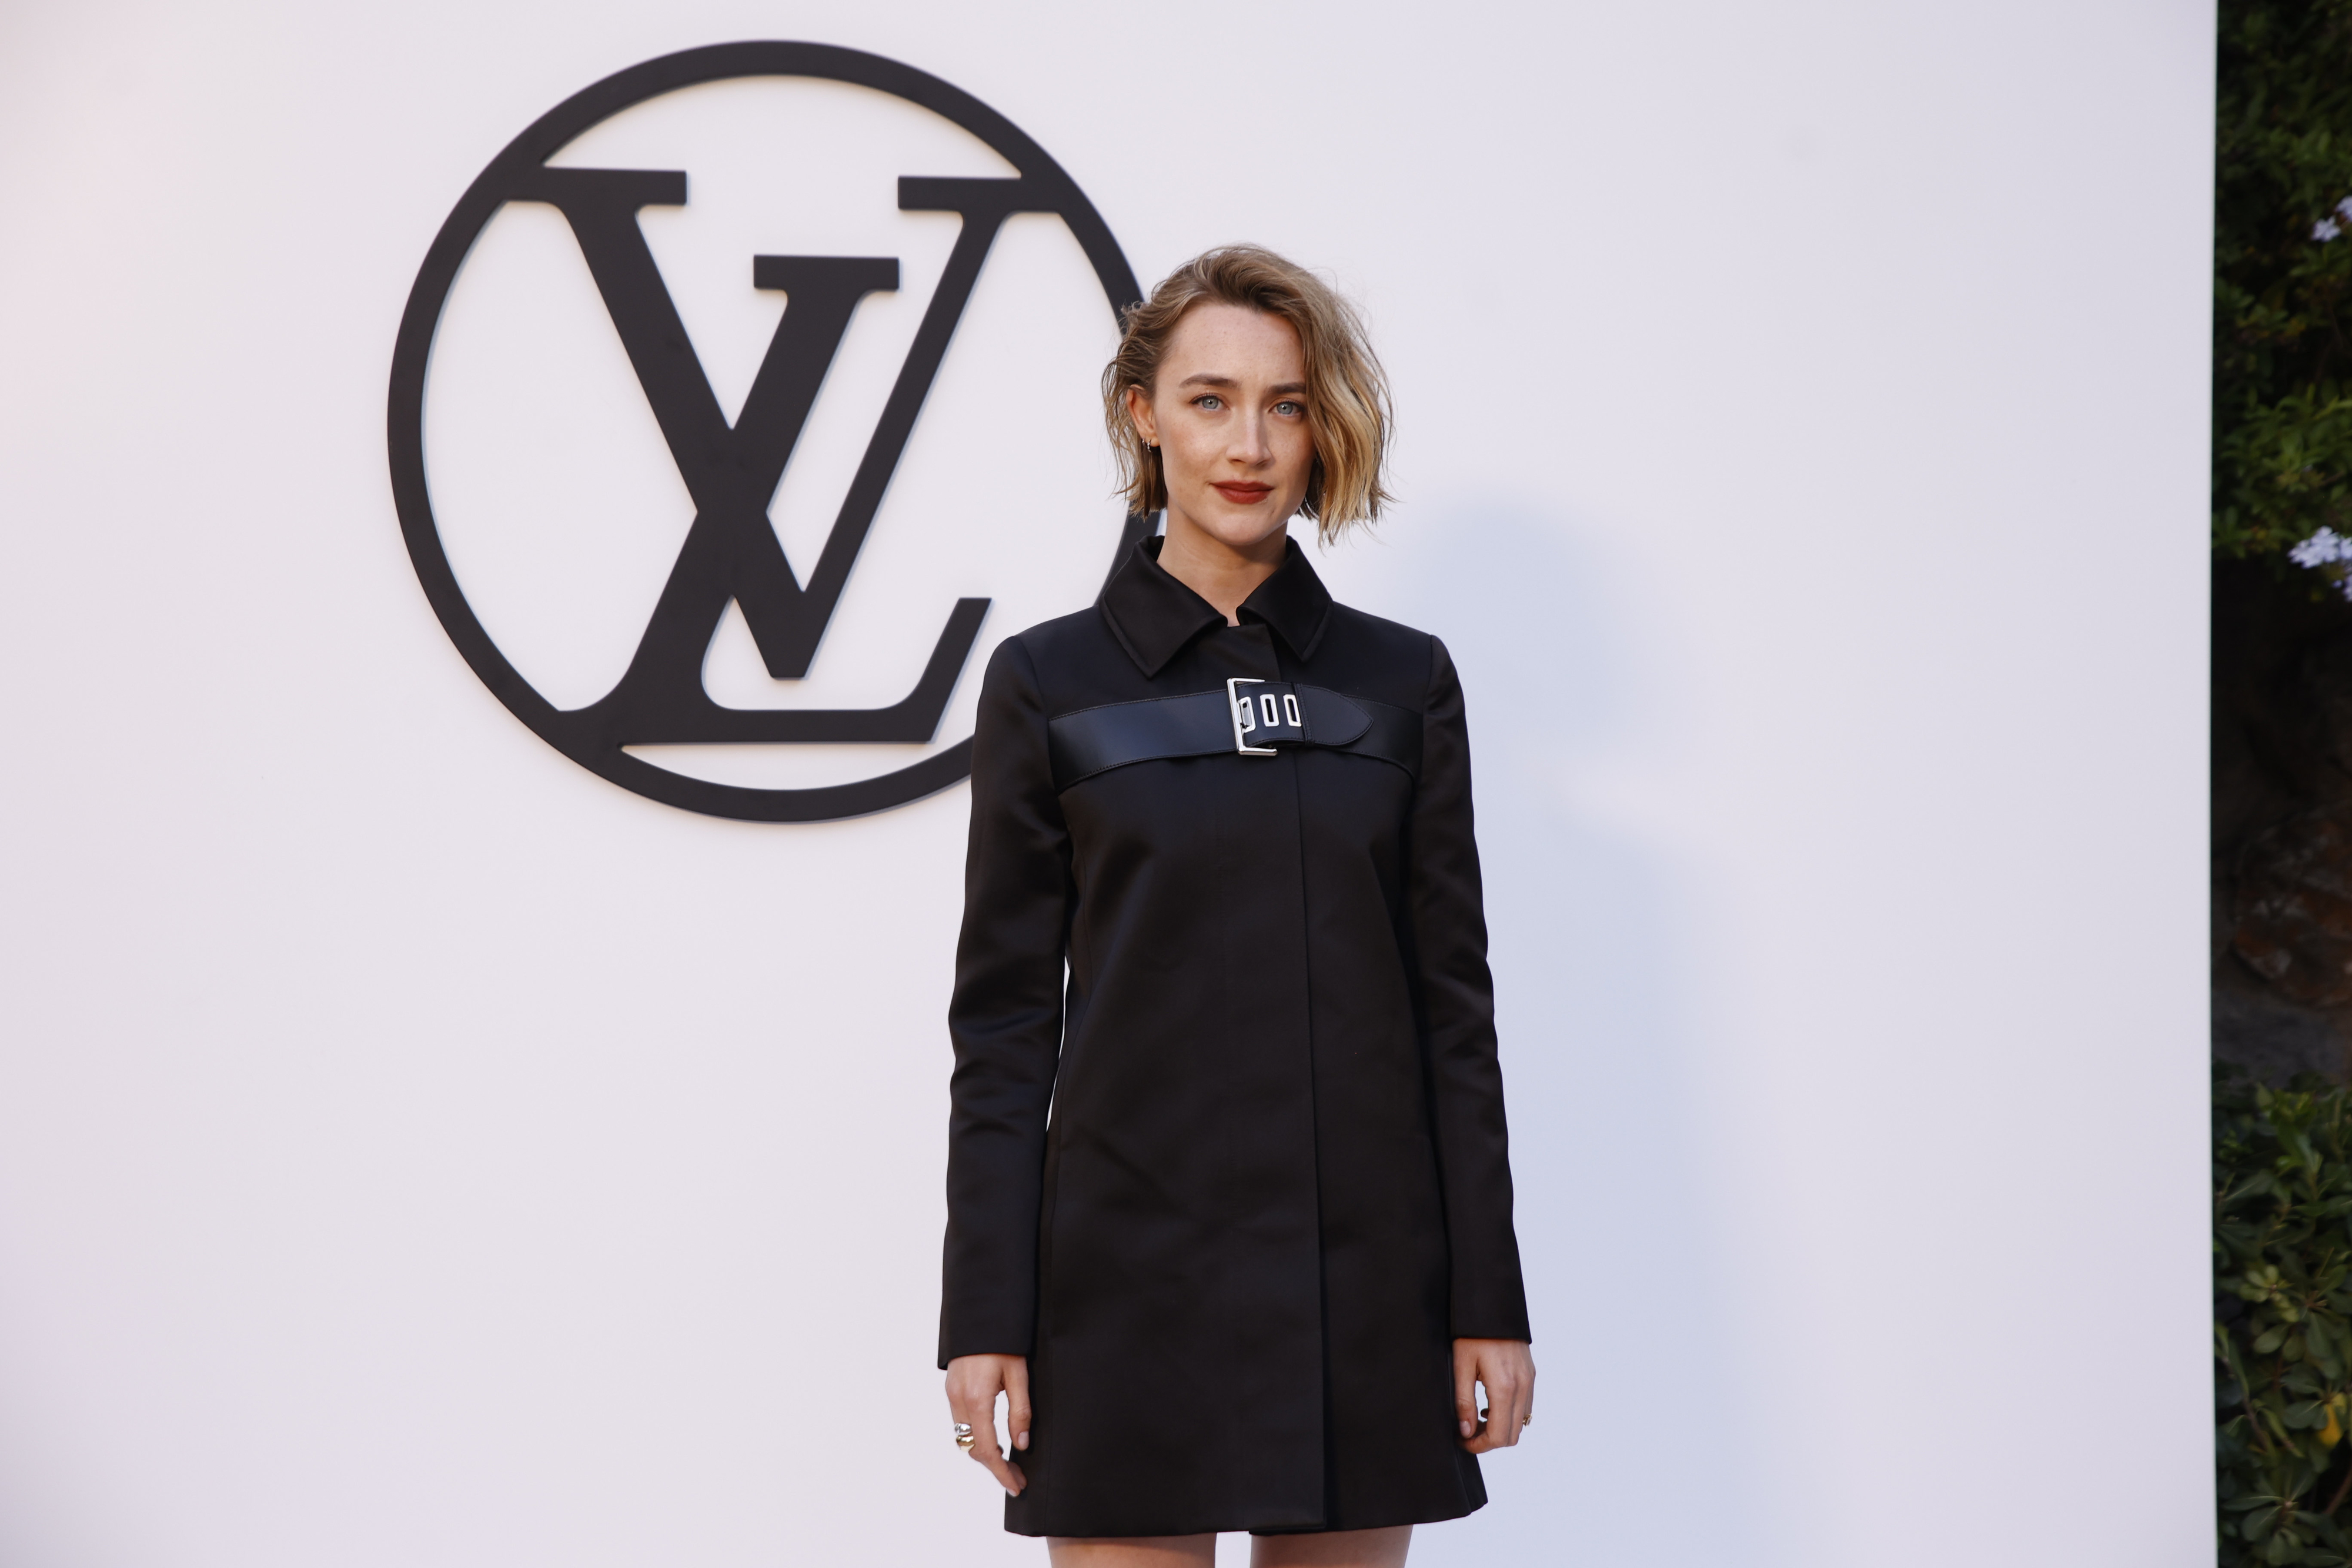 Saoirse Ronan poses on the red carpet in a stylish black dress coat in front of a Louis Vuitton logo backdrop